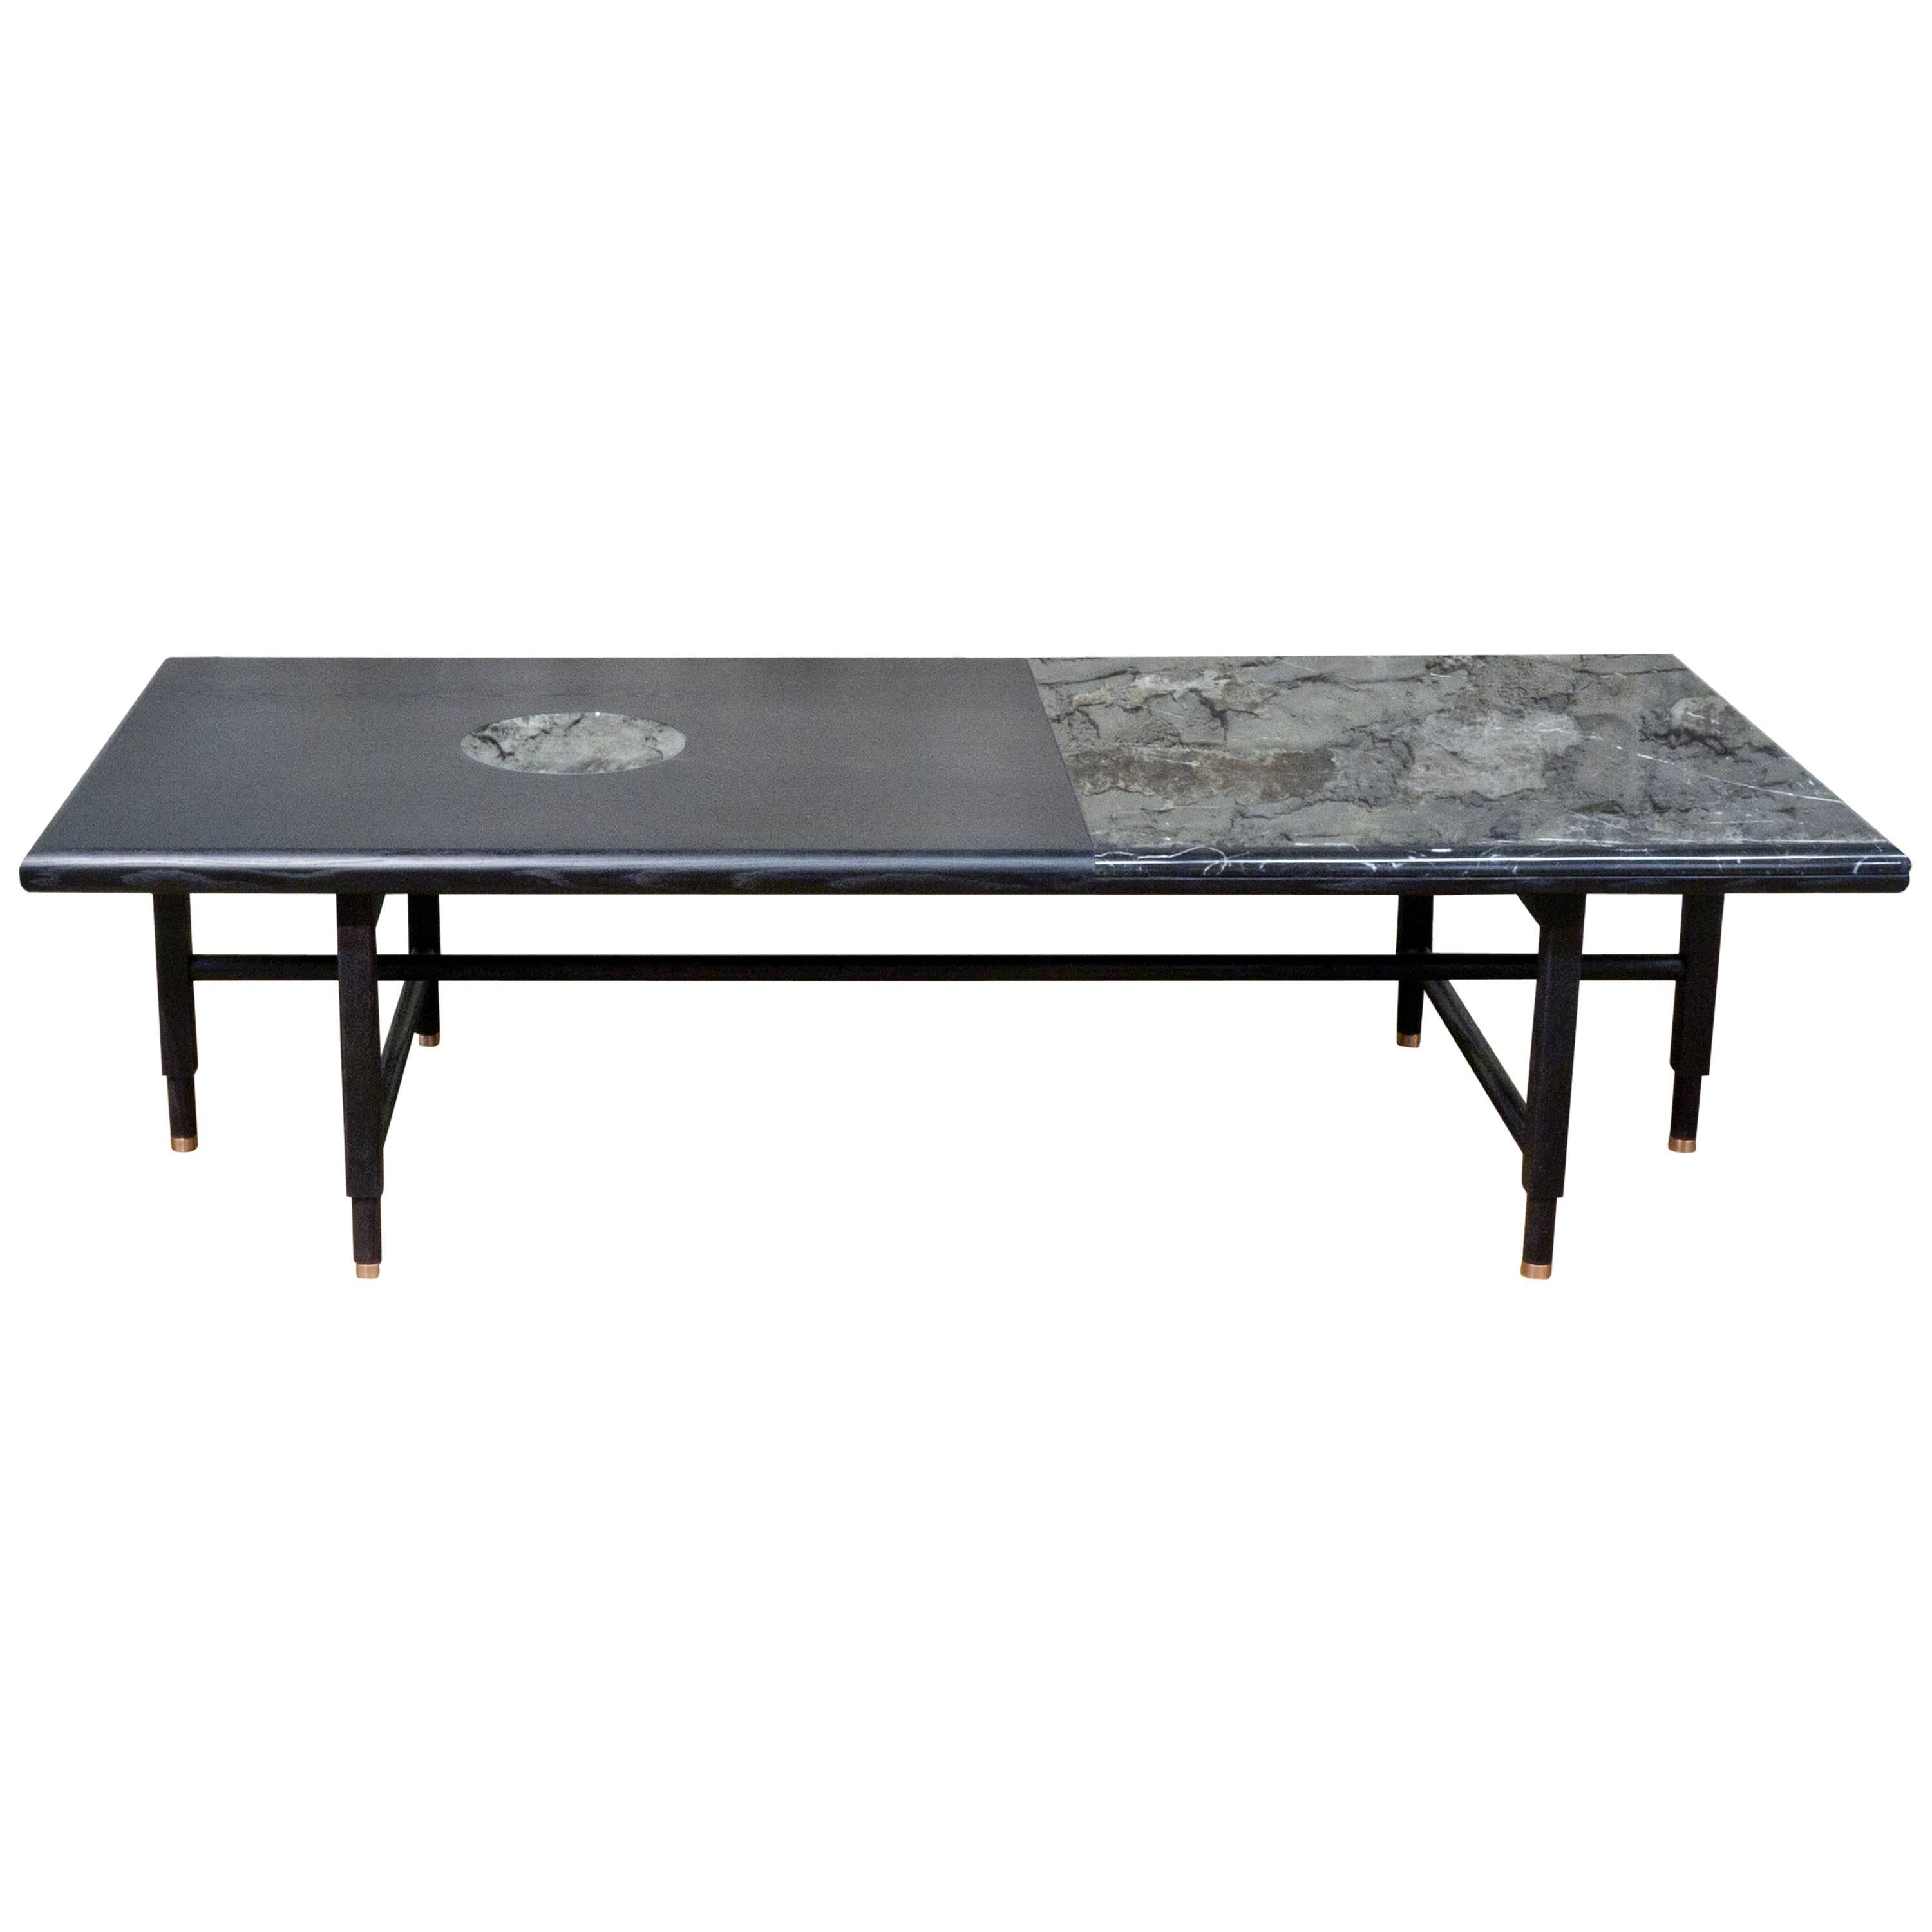 St. Charles Cocktail Table in Black and Black Marble by Volk